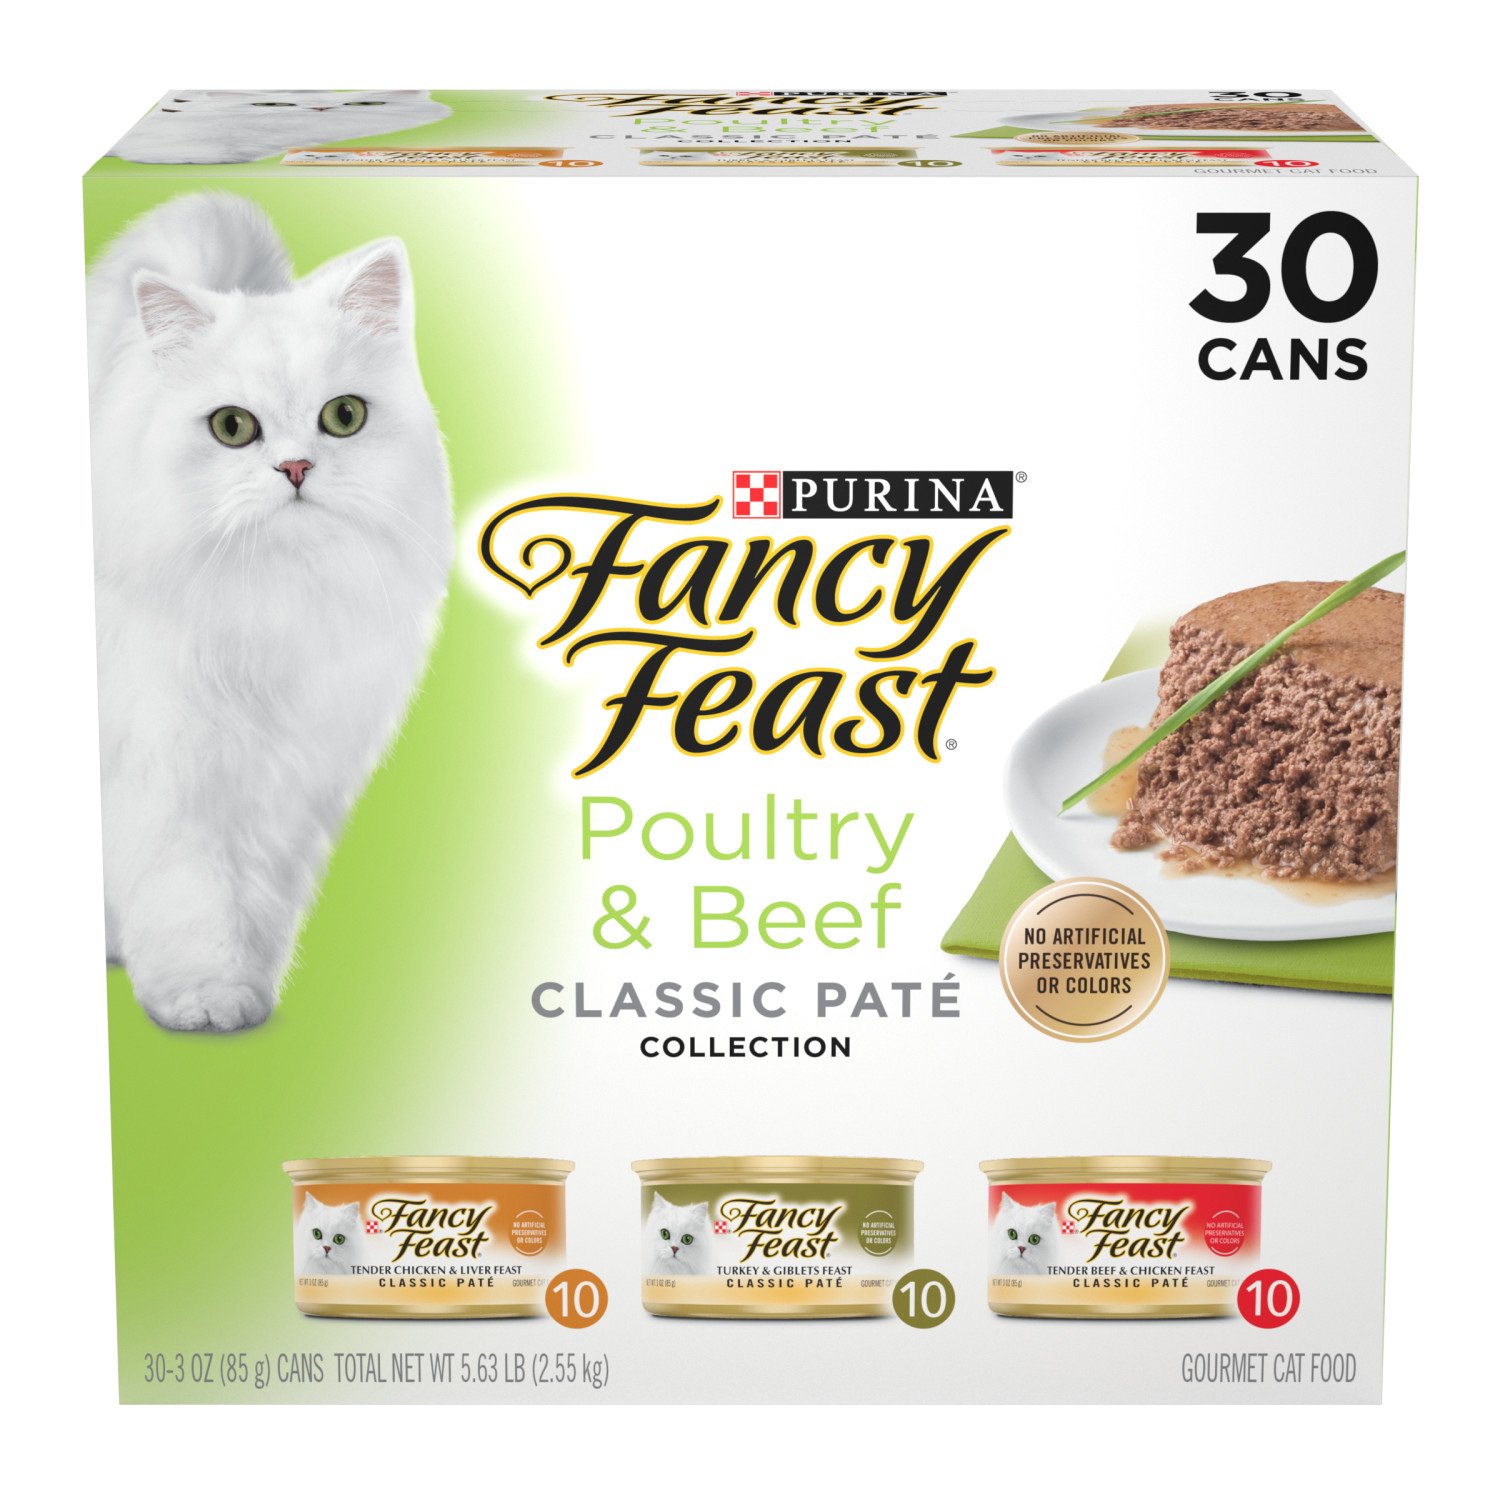 Purina Fancy Feast Poultry & Beef Gourmet Cat Food Variety Pack Shop